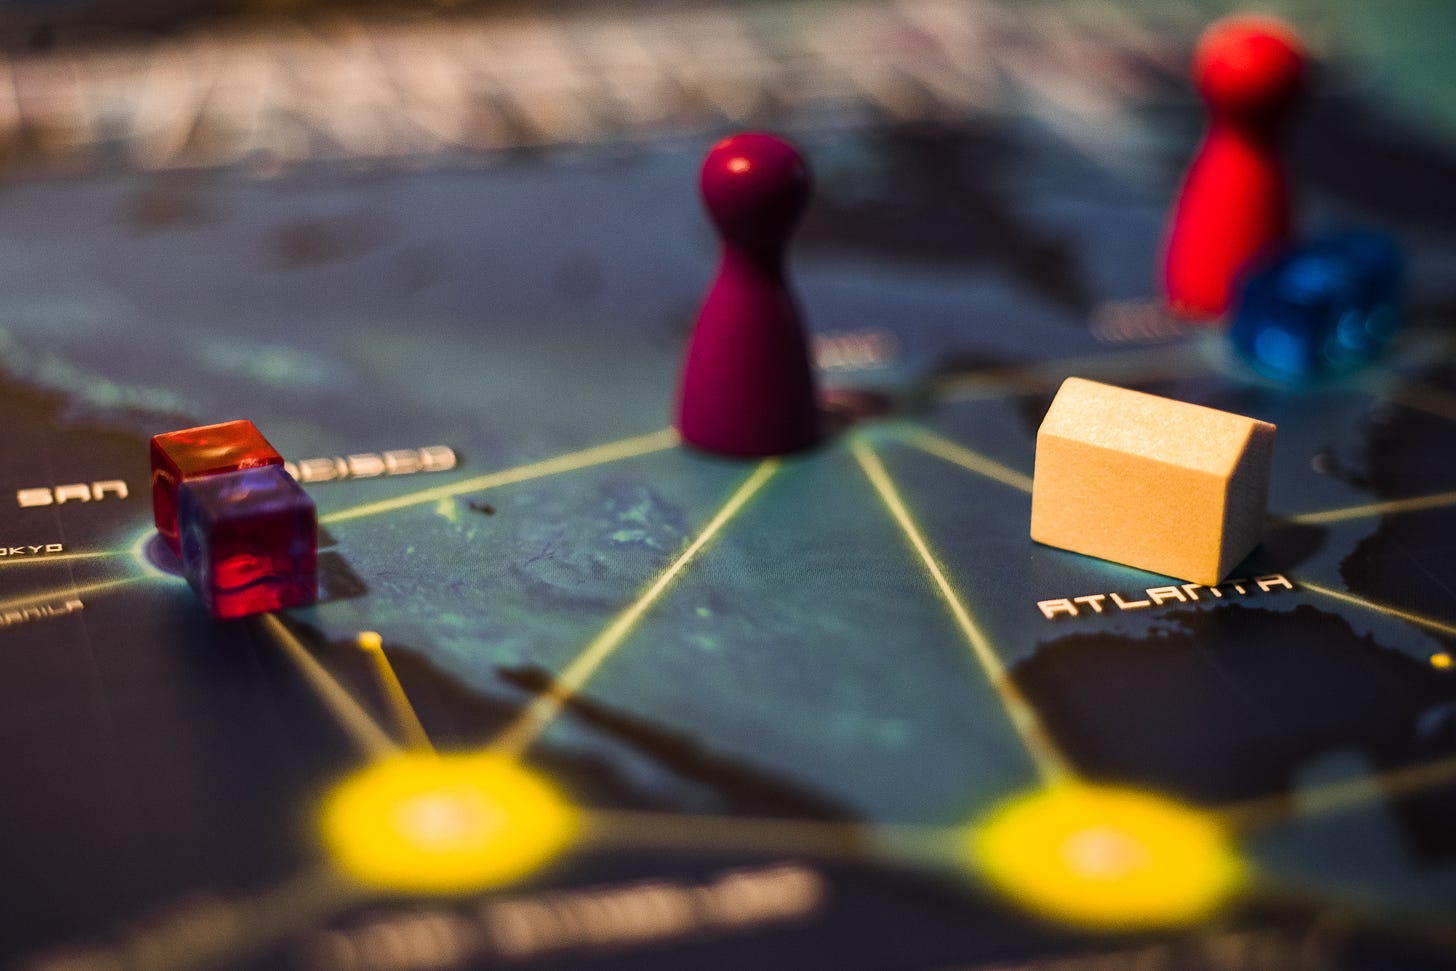 The board game Pandemic. There are disease cubes on San Francisco, a research station on Atlanta, and a player pawn is visible.